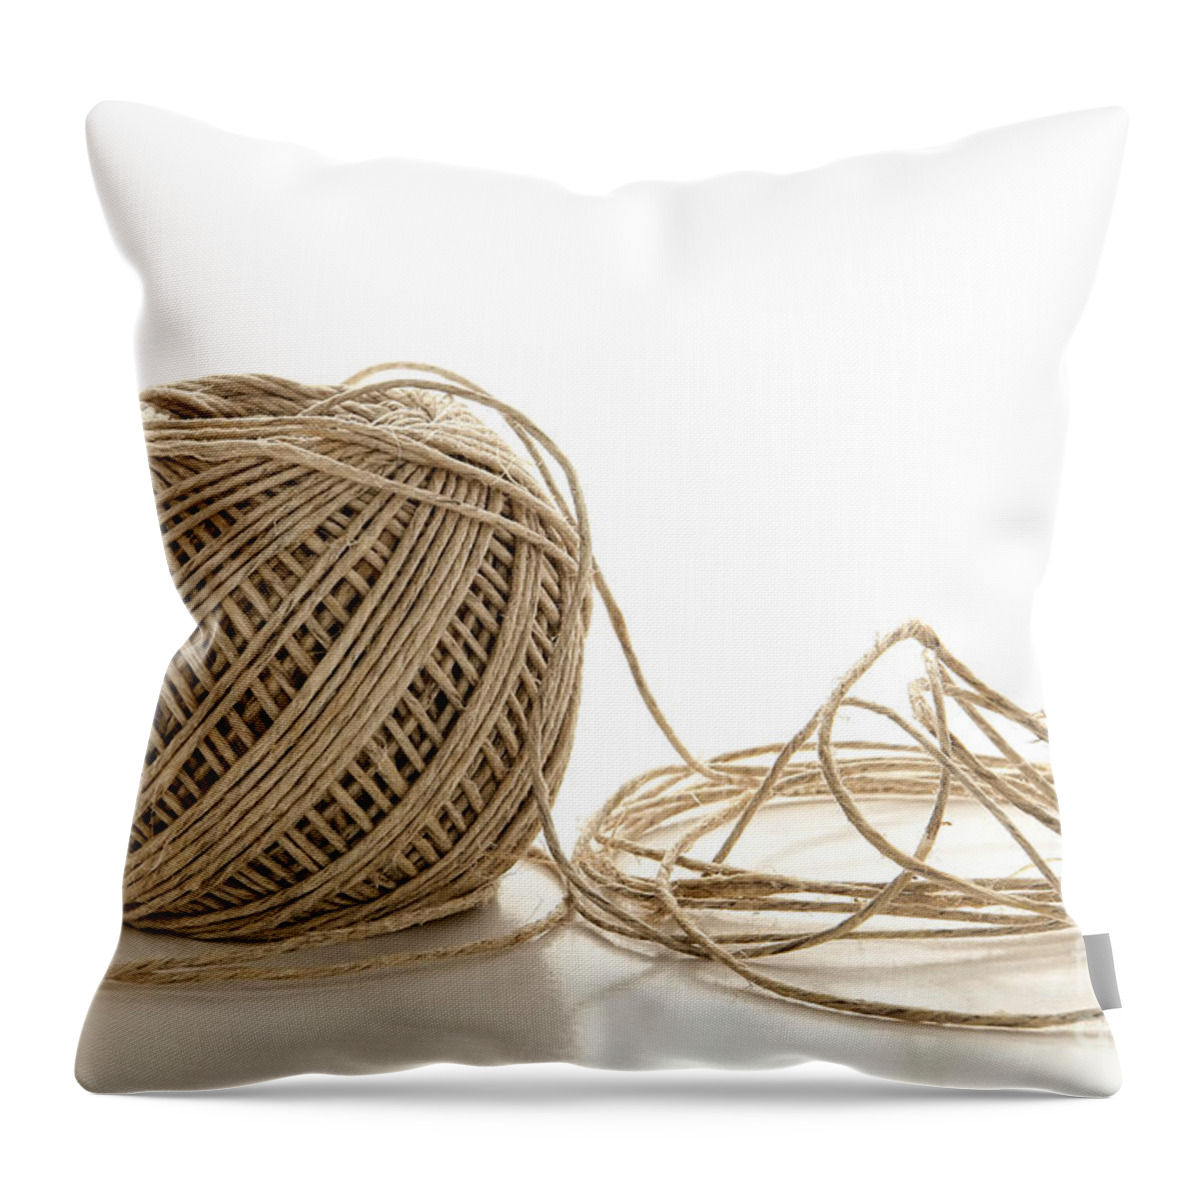 Twine Throw Pillow featuring the photograph Twine by Olivier Le Queinec